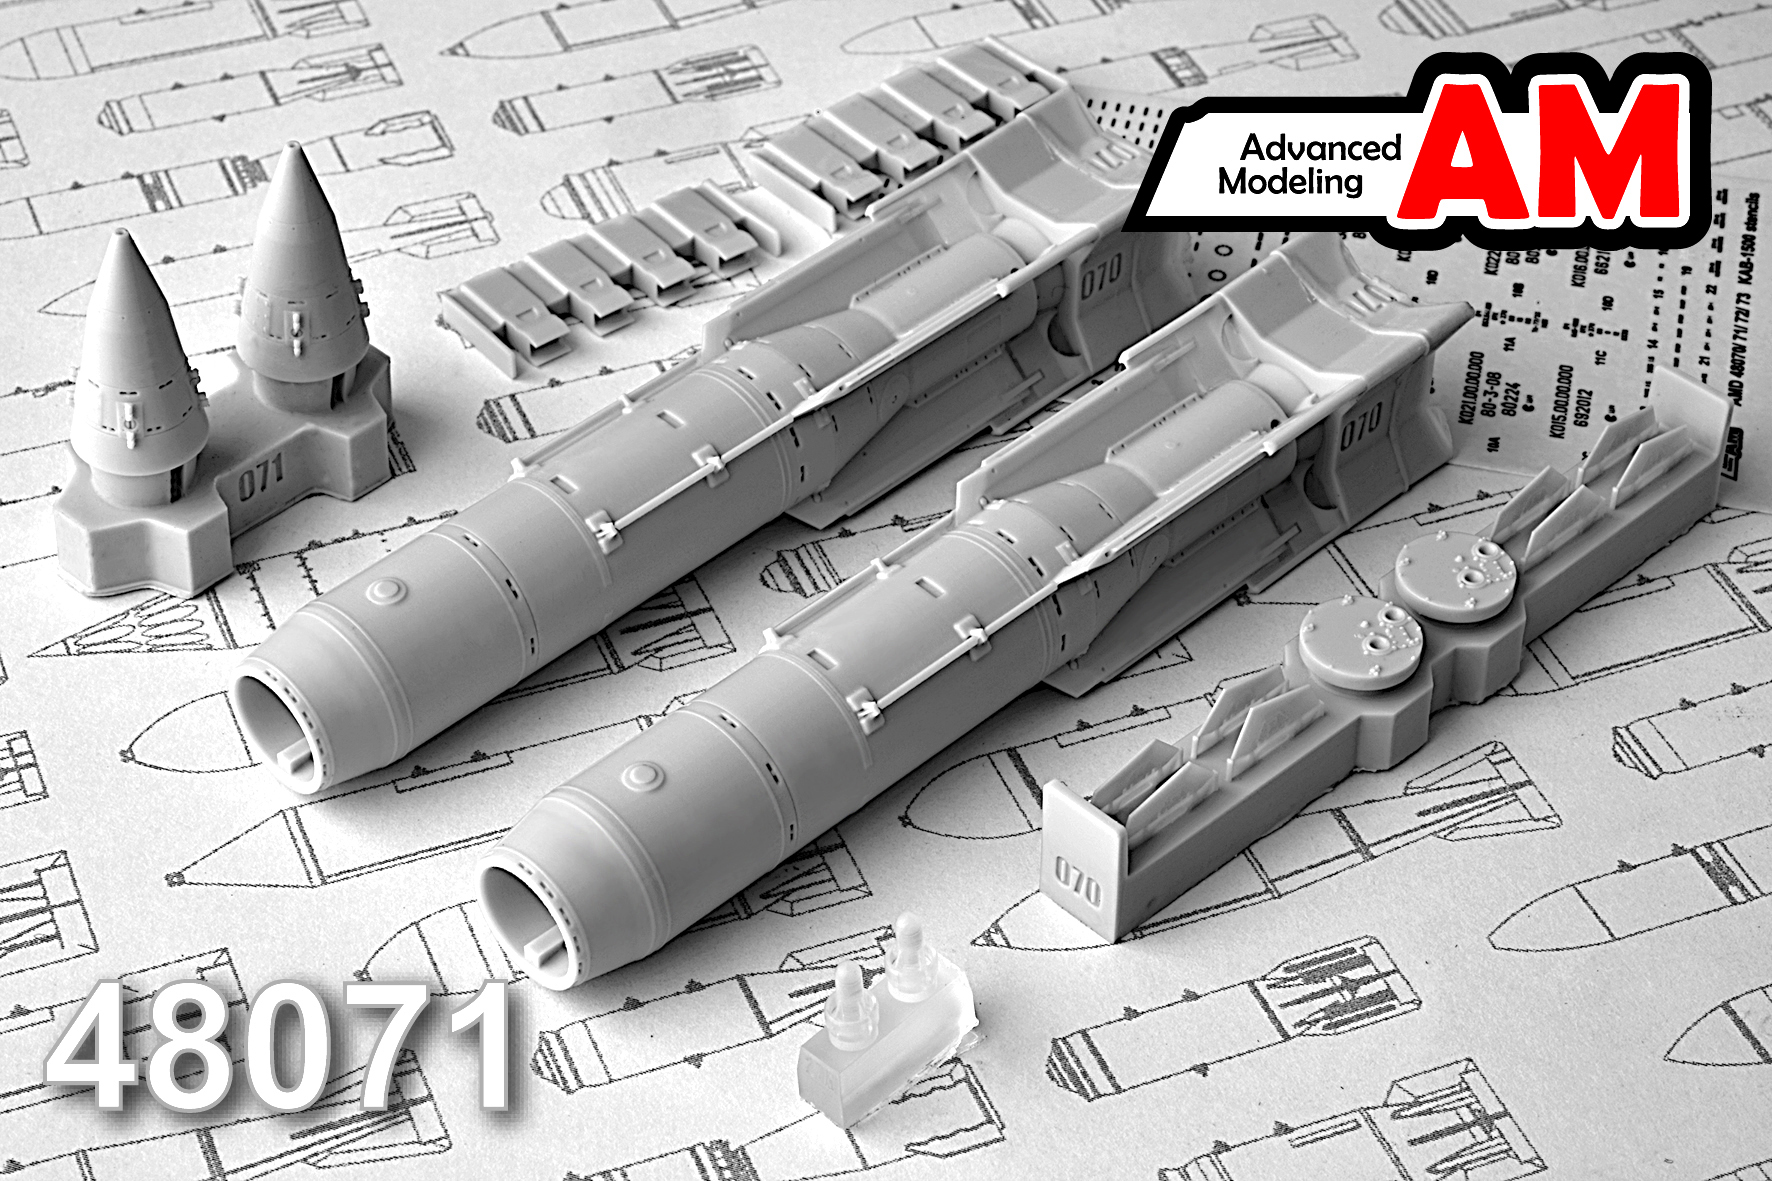 Additions (3D resin printing) 1/48 KAB-1500L Corrective Air Bomb (Advanced Modeling) 